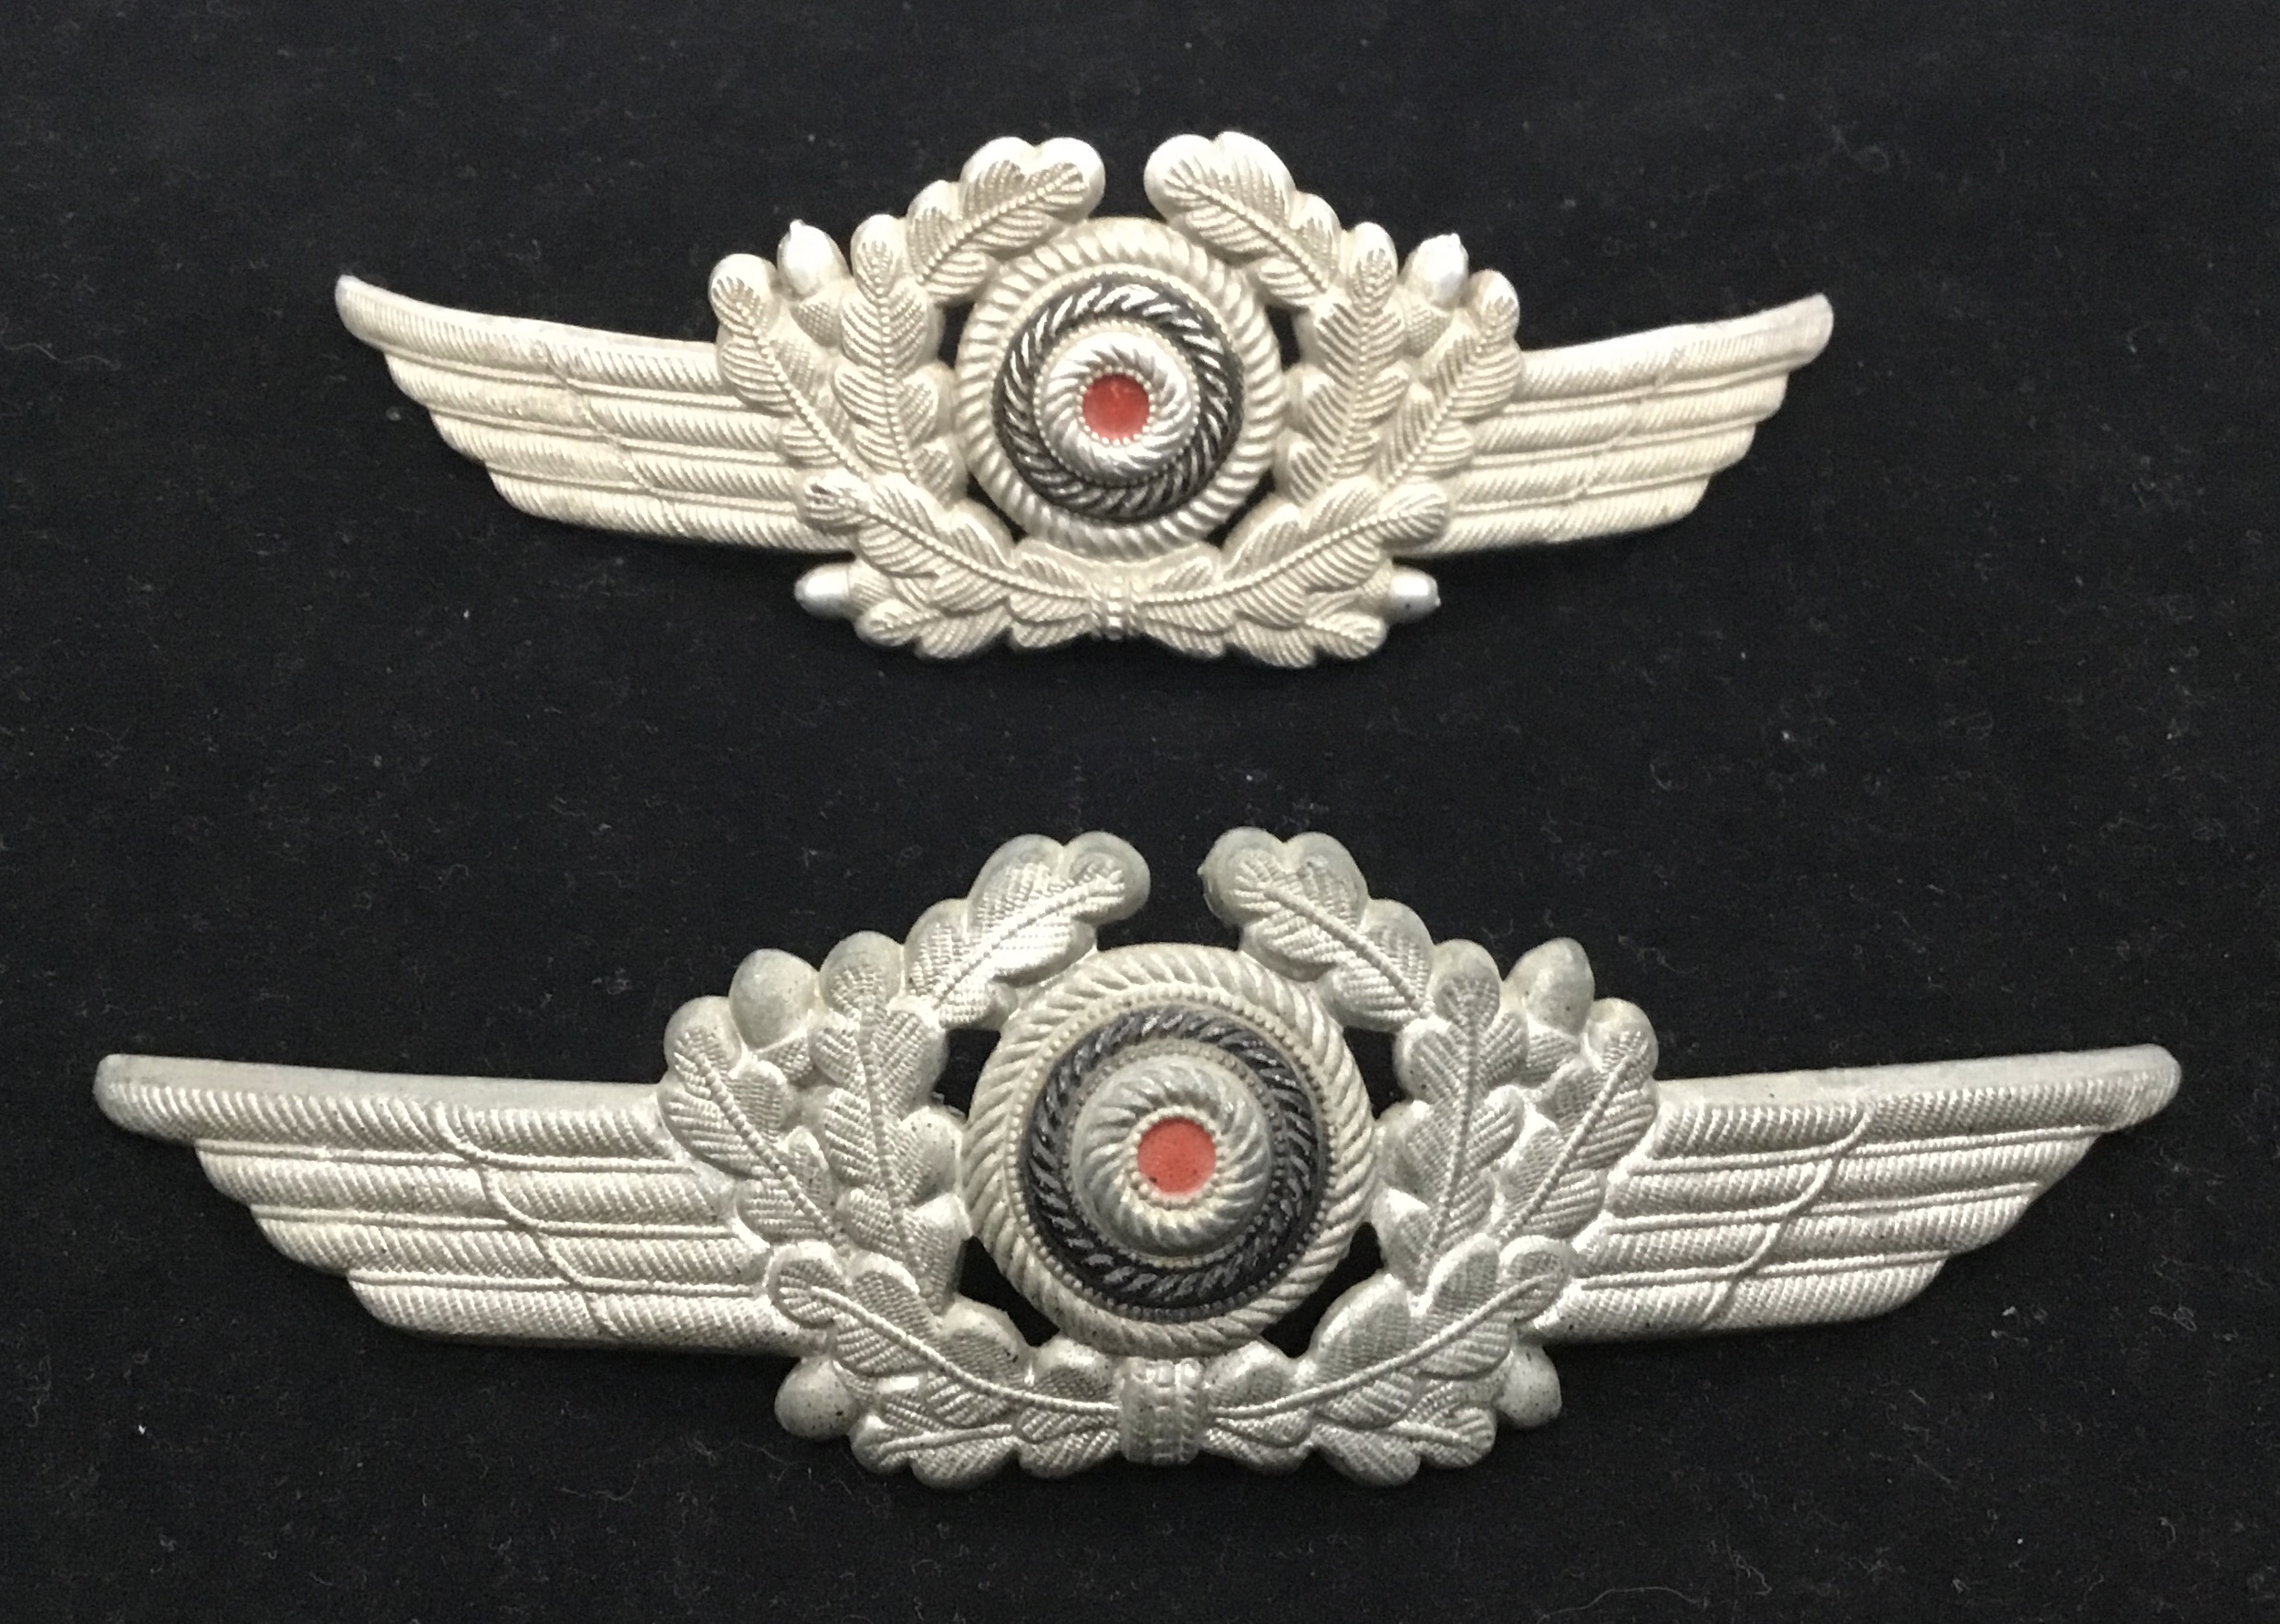 2 Ww2 Luftwaffe officers metal visor badges. Both with painted cockade area, flanked by die